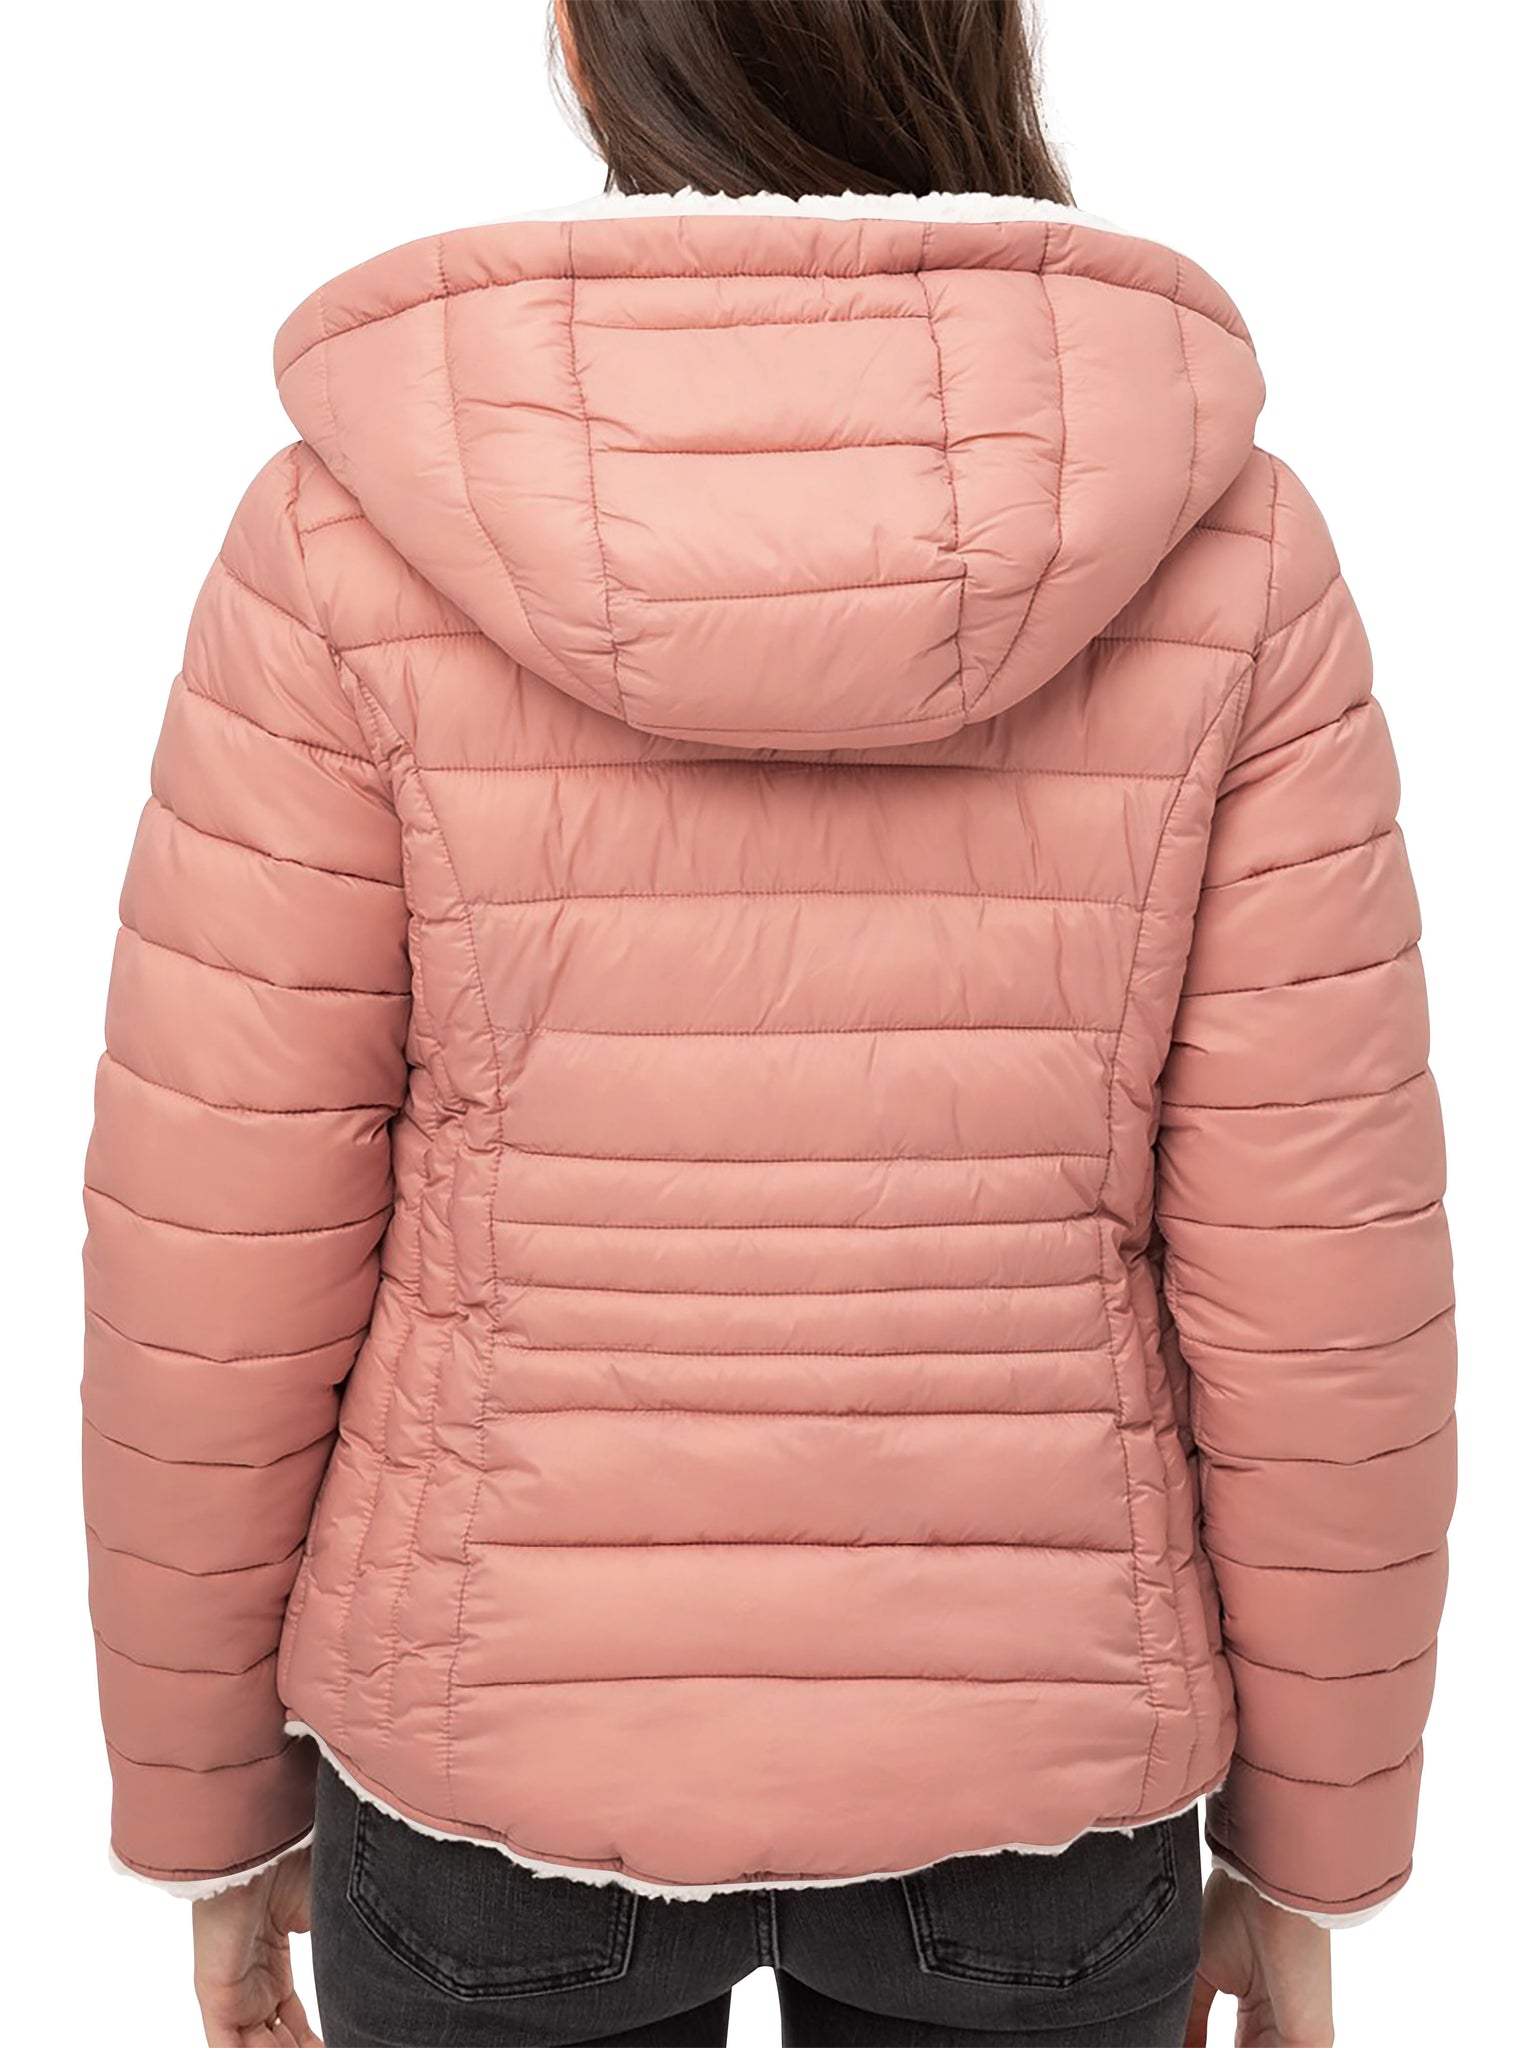 ladies_reversible_jacket_hood_fleece_white_puffer_with_fur_black_collection_water_resistance_off_white_synthetic_alternative_down_sherpa_lined_lightweight_military_parka_ski_coat_nuage_quilted_outerwear_warm_winter_fall_plush_padding_petite_mujer_chaqueta_outdoor_hike_performance_camping_commuter_short_midlength_Mauve